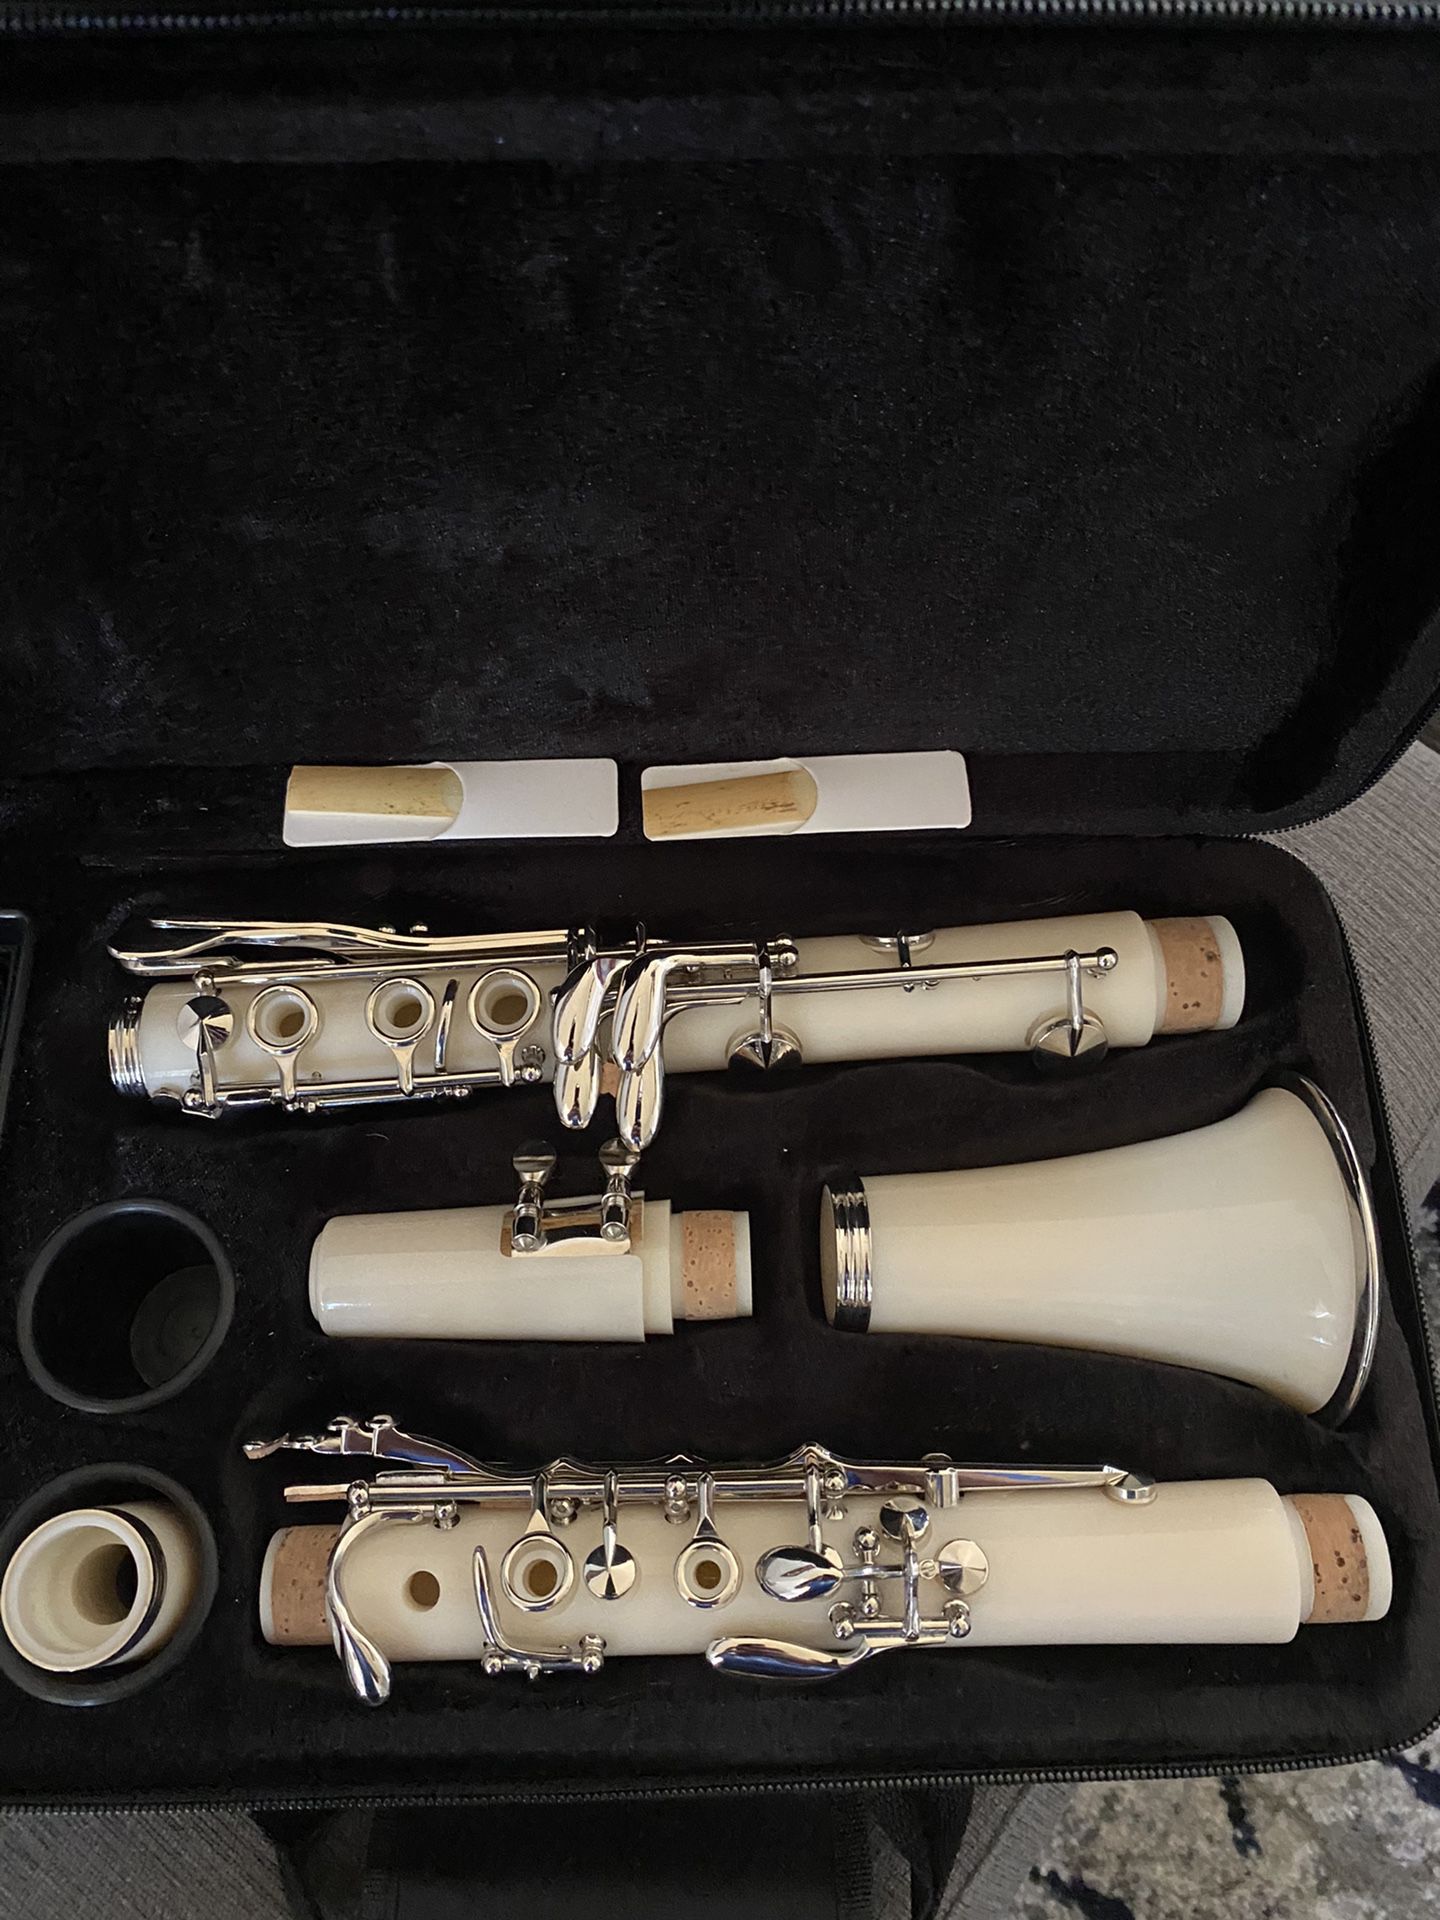 Like New White Clarinet with Set of Reeds $95 Firm